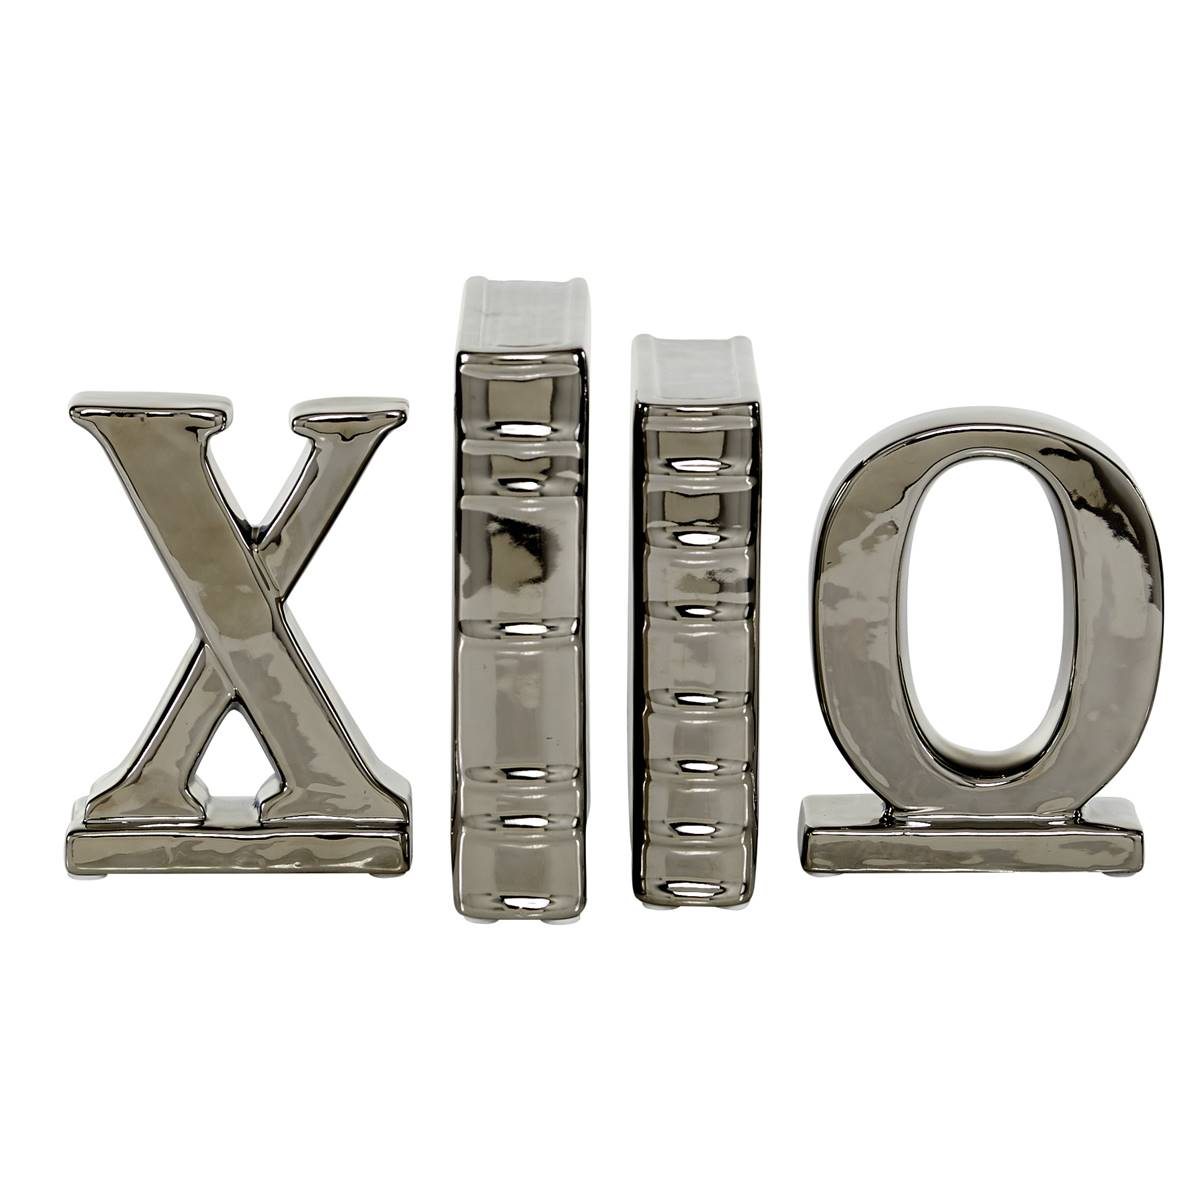 9th & Pike(R) Silver Ceramic Bookend Sculptures - Set Of 4